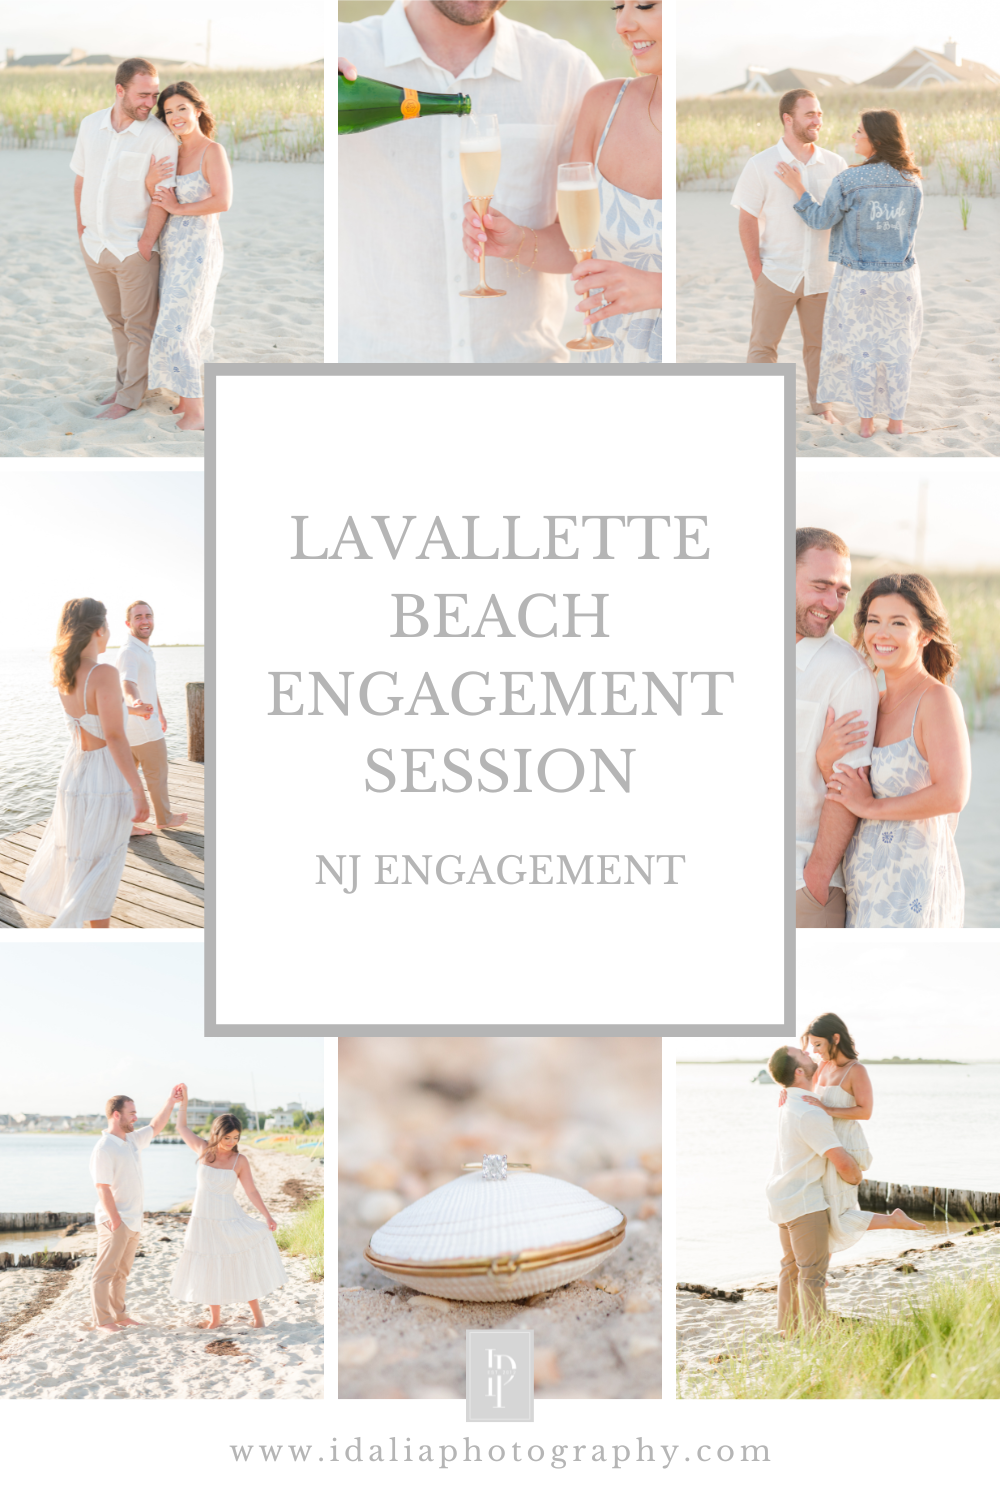 Lavallette Beach Engagement Session in the summer time with New Jersey wedding photographer Idalia Photography's associate team